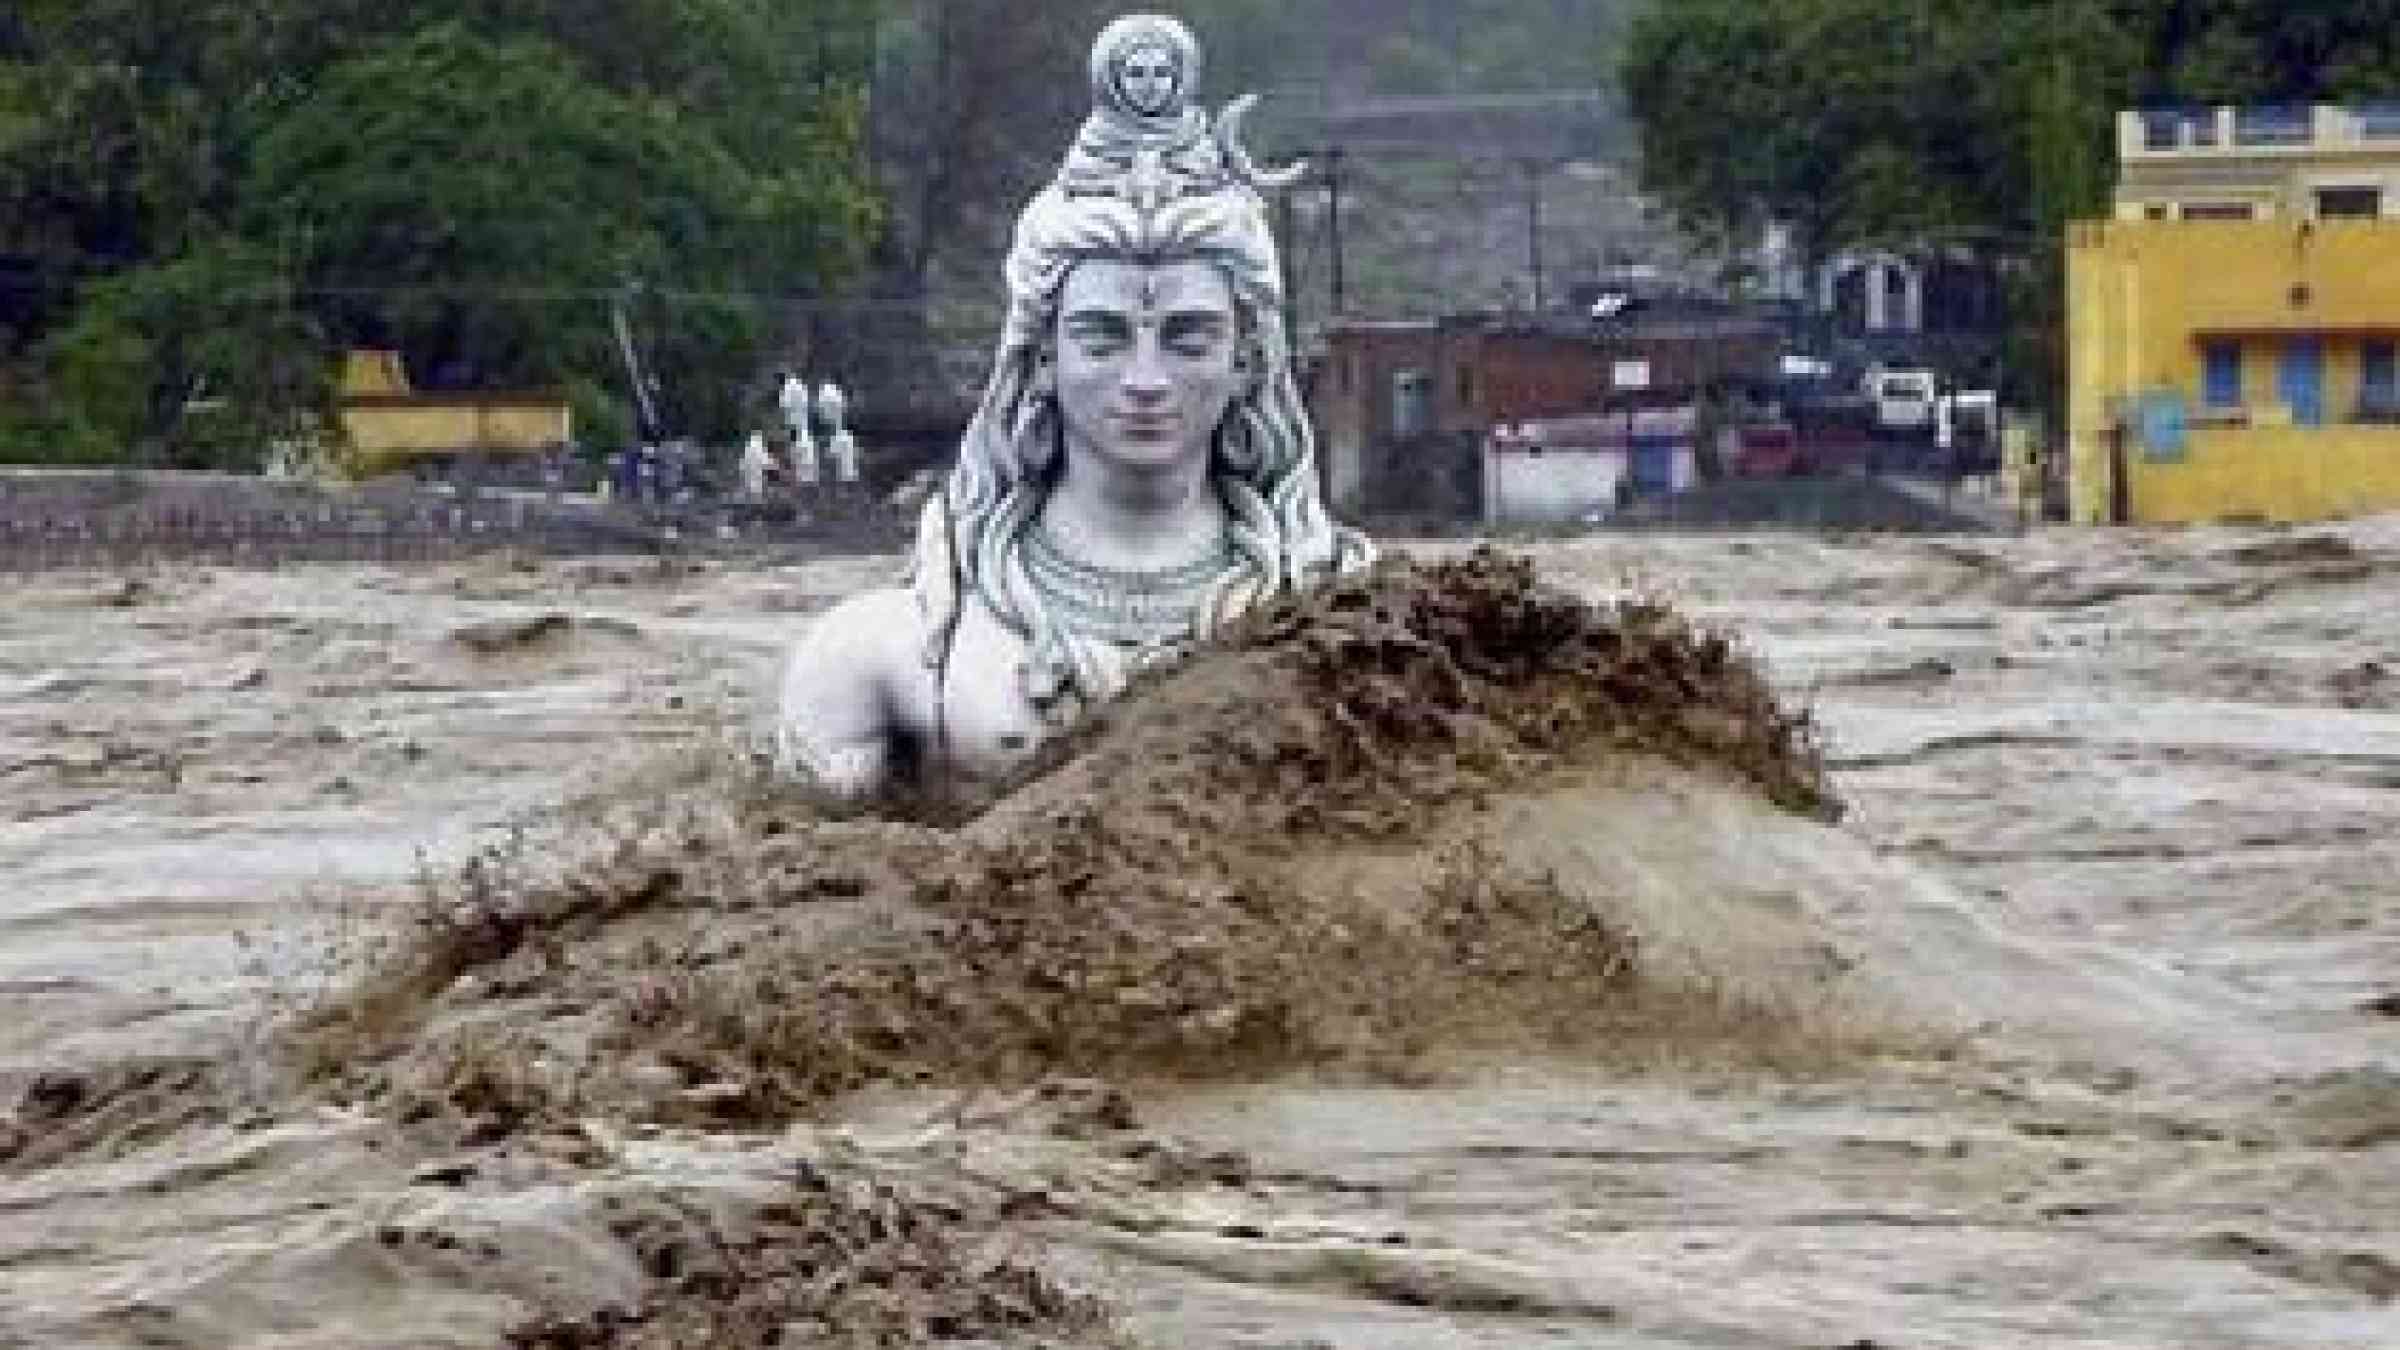 The statue of a Hindu deity is submerged by flood waters of the river Ganges in Uttarakhand, India.